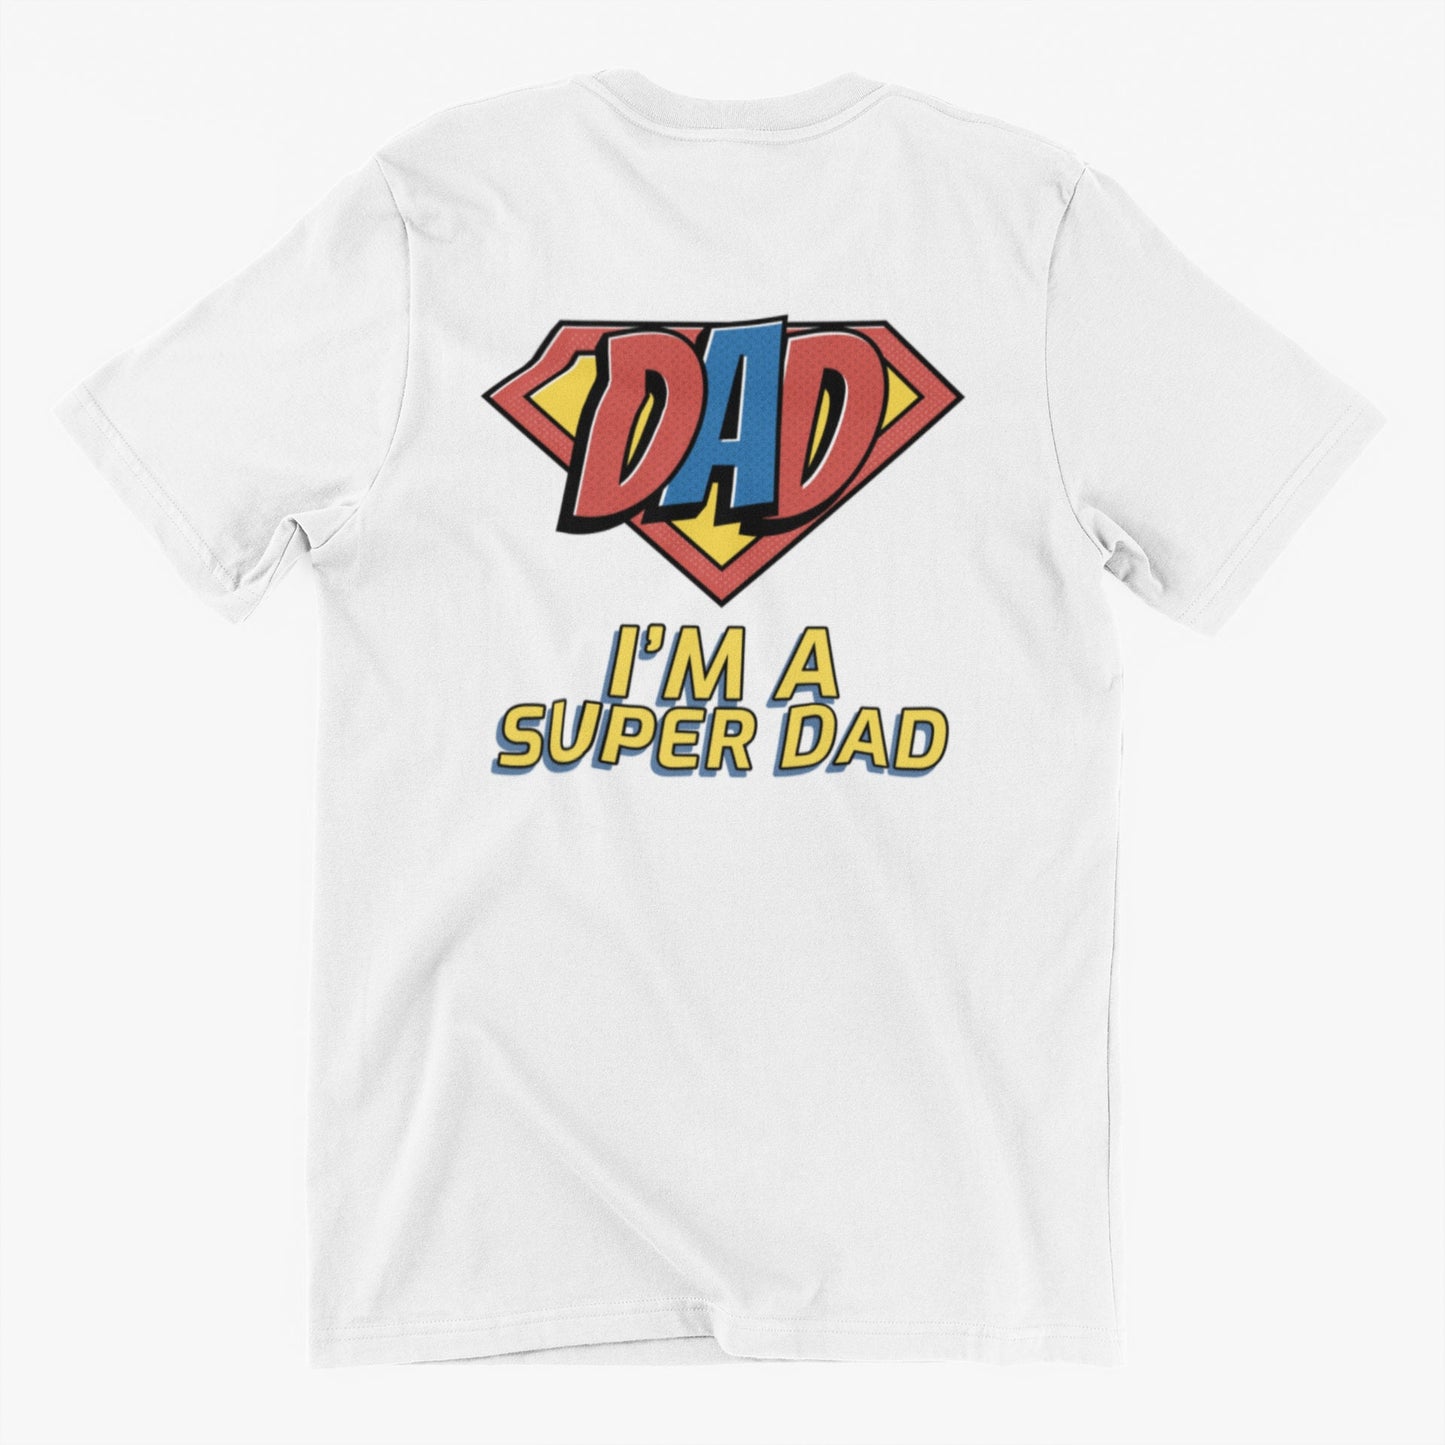 I'm a Super Dad - Custom Printed T shirt for gifts fathers day christmas birthday